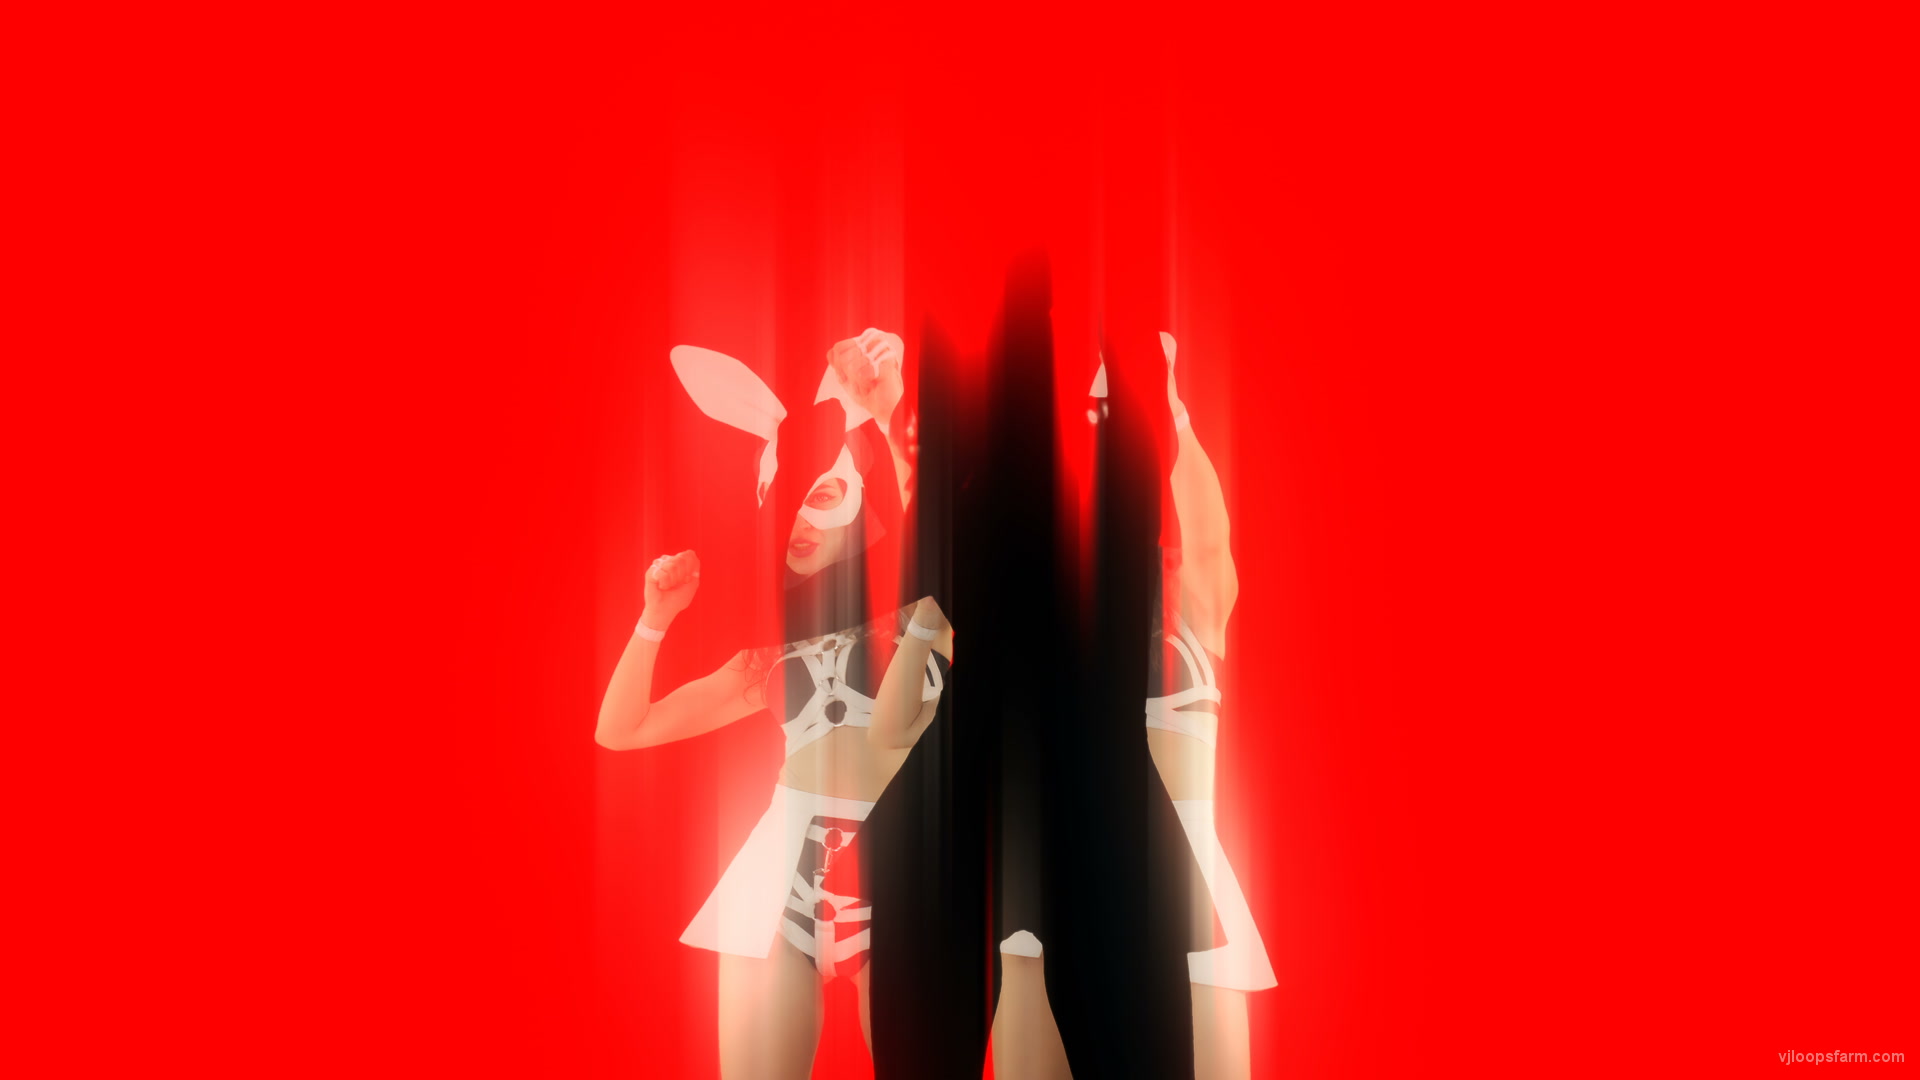 Red Strobing Bunny Beats Girls with Time Displace Effect 4K Video Art Vj Loop